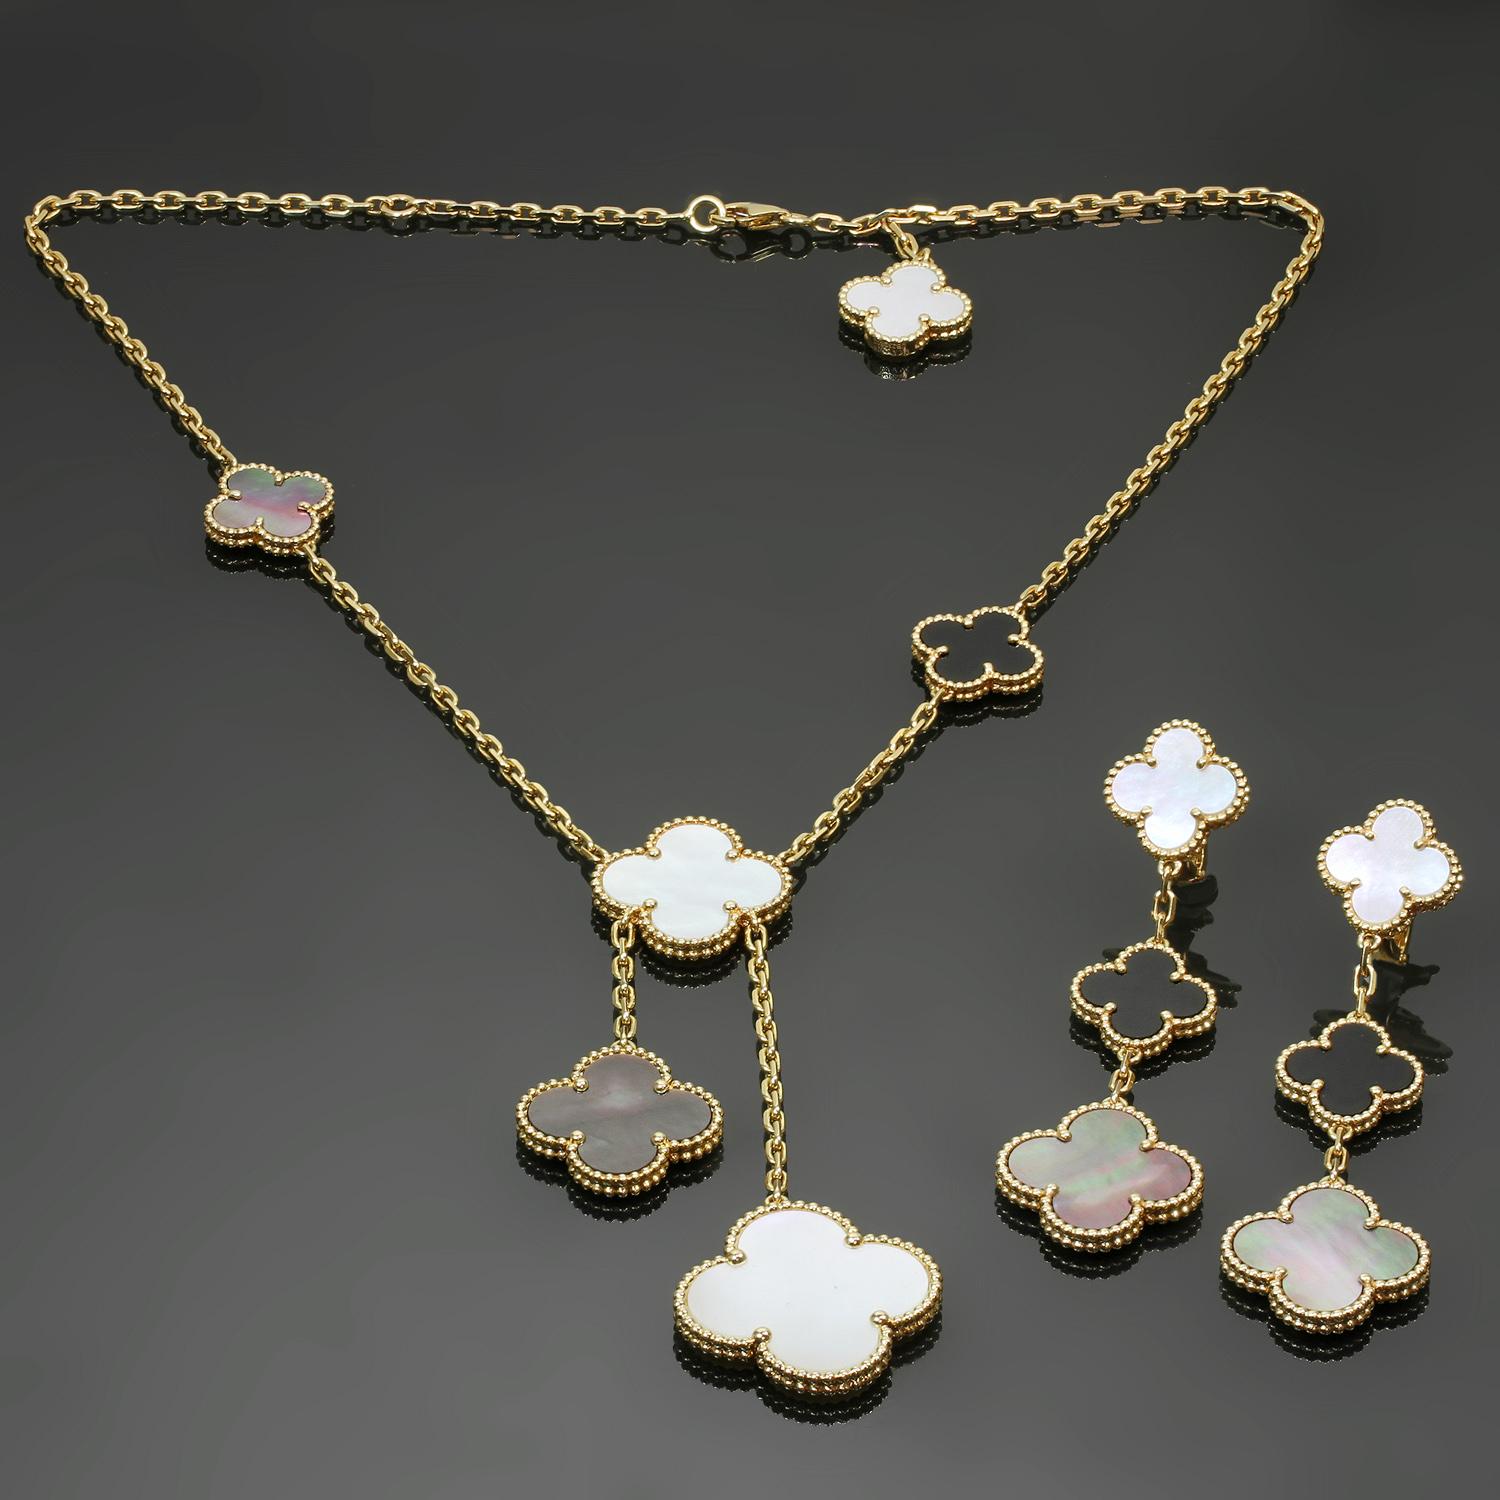 This stunning authentic Van Cleef & Arpels jewelry set from the iconic Magic Alhambra collection consists of a 6-motif necklace and matching 3-motif dangling earrings featuring the classic 4-leaf clover beaded design crafted in 18k yellow gold and